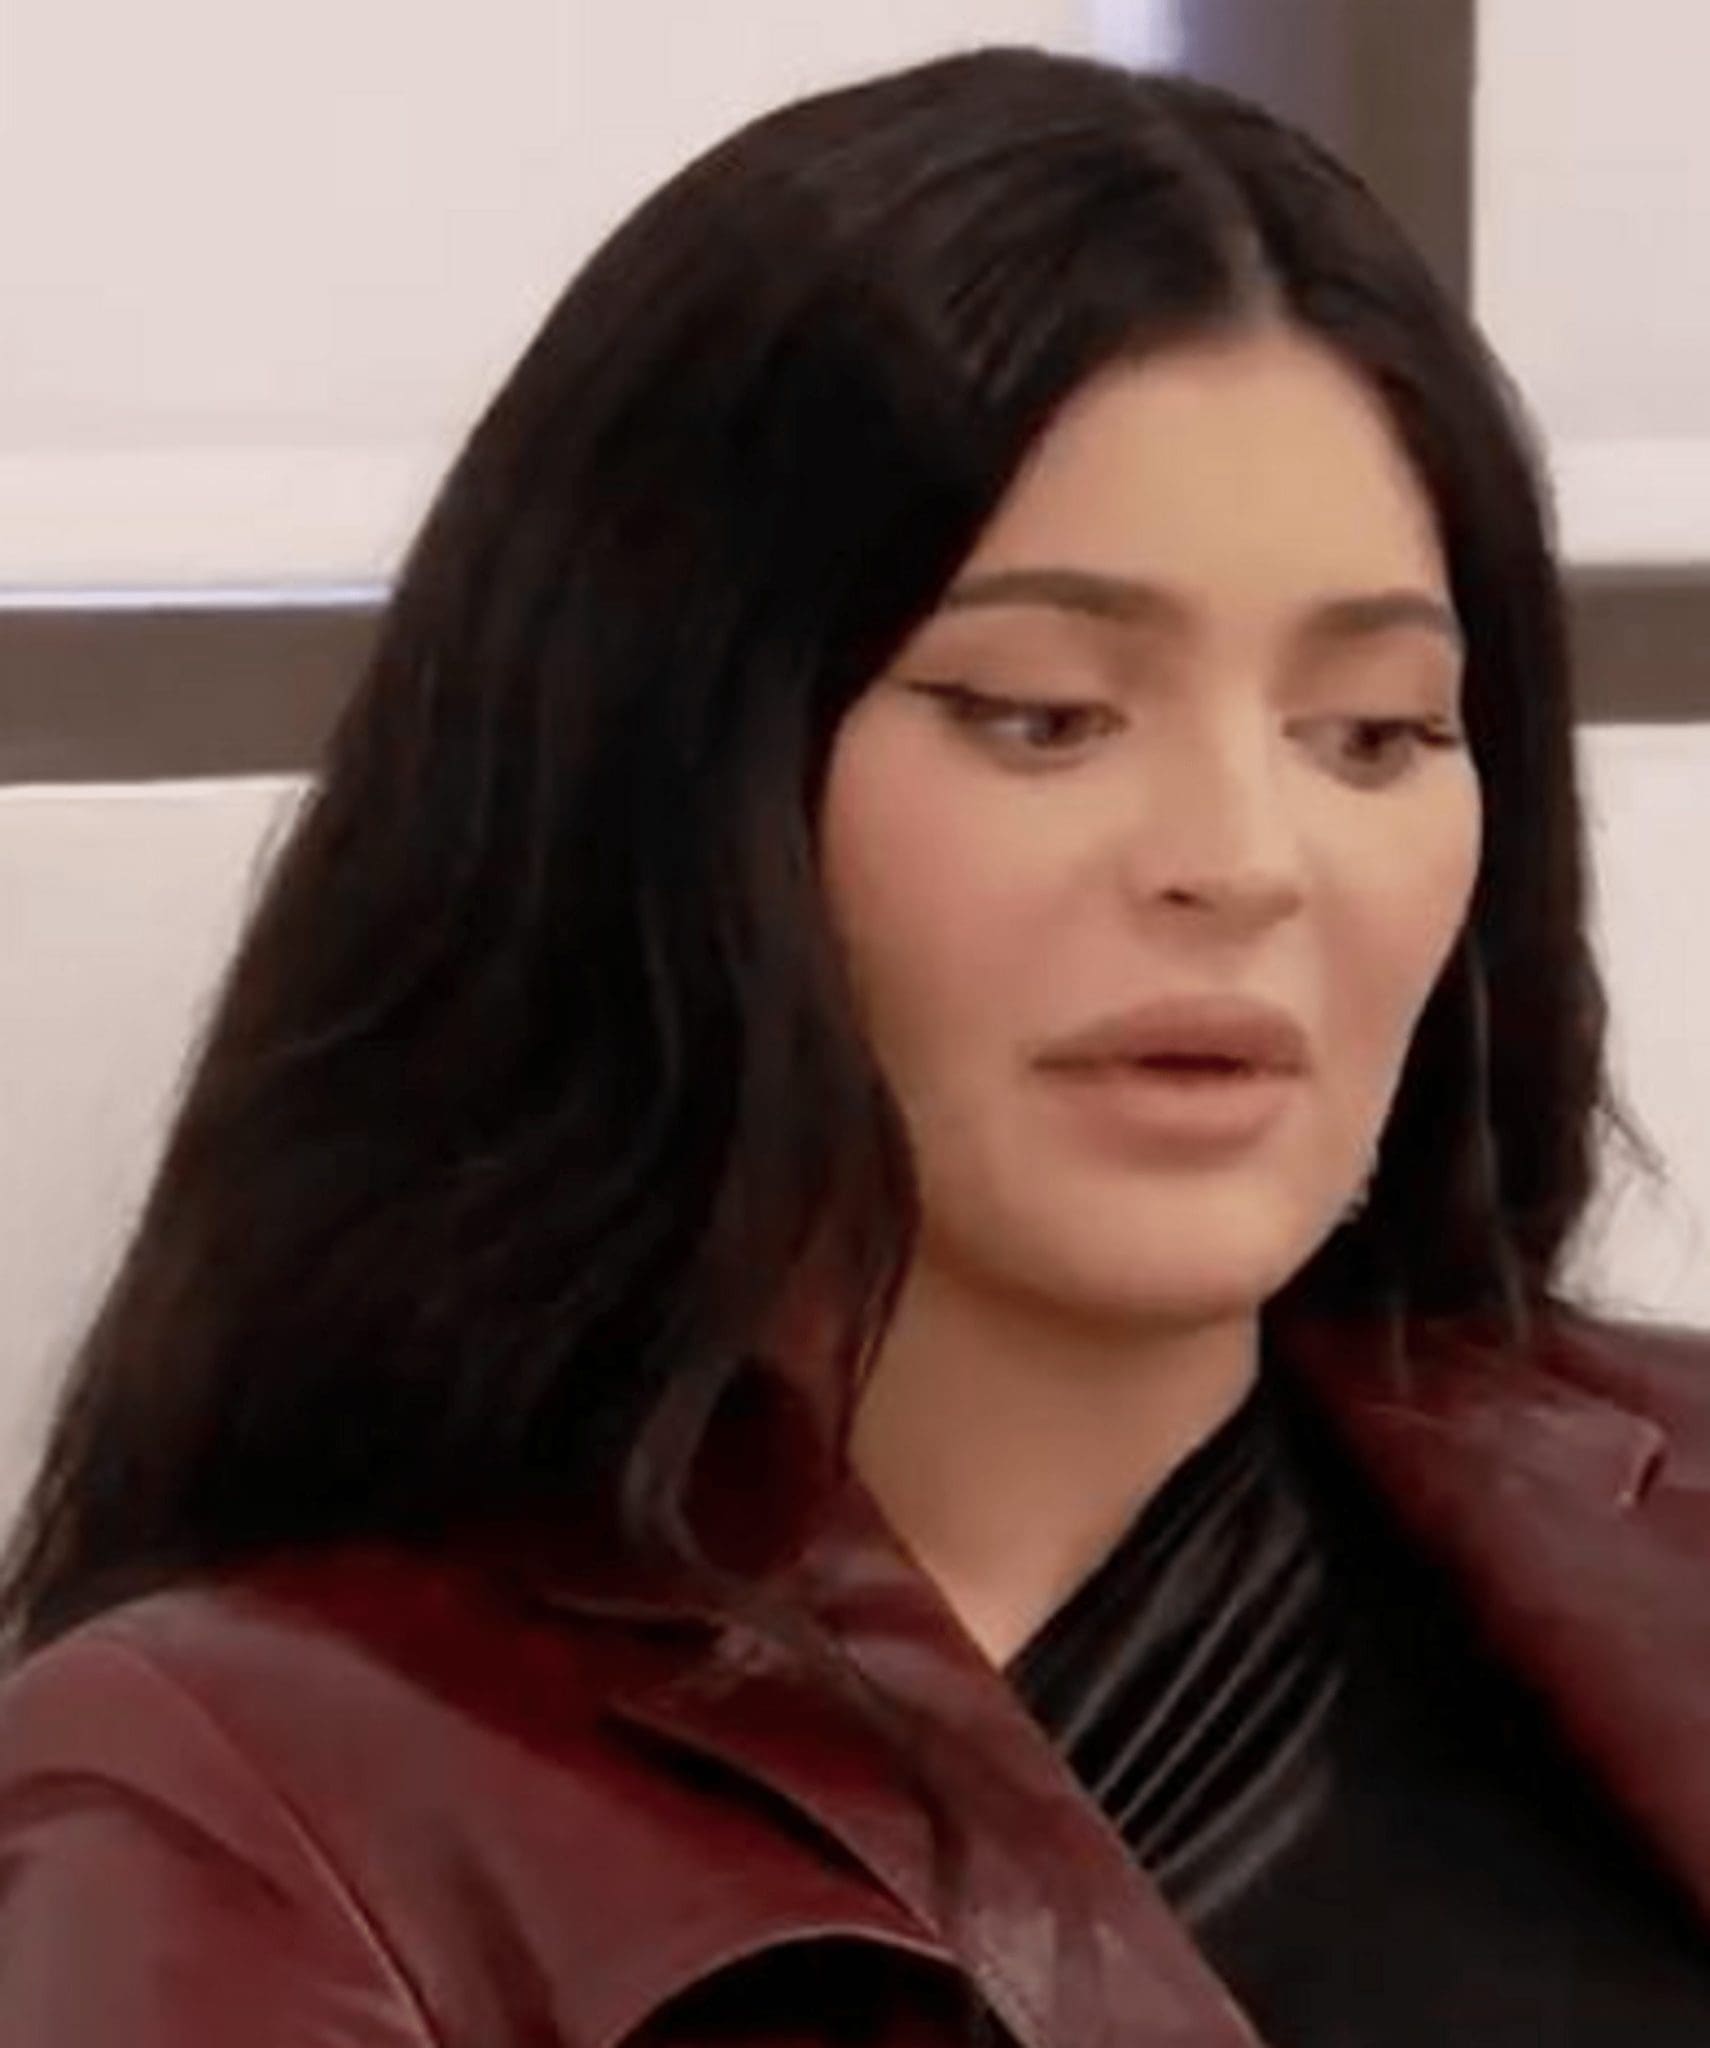 After The Birth Of Her Son In February, Kylie Jenner Made Hints That She Had Postpartum Depression